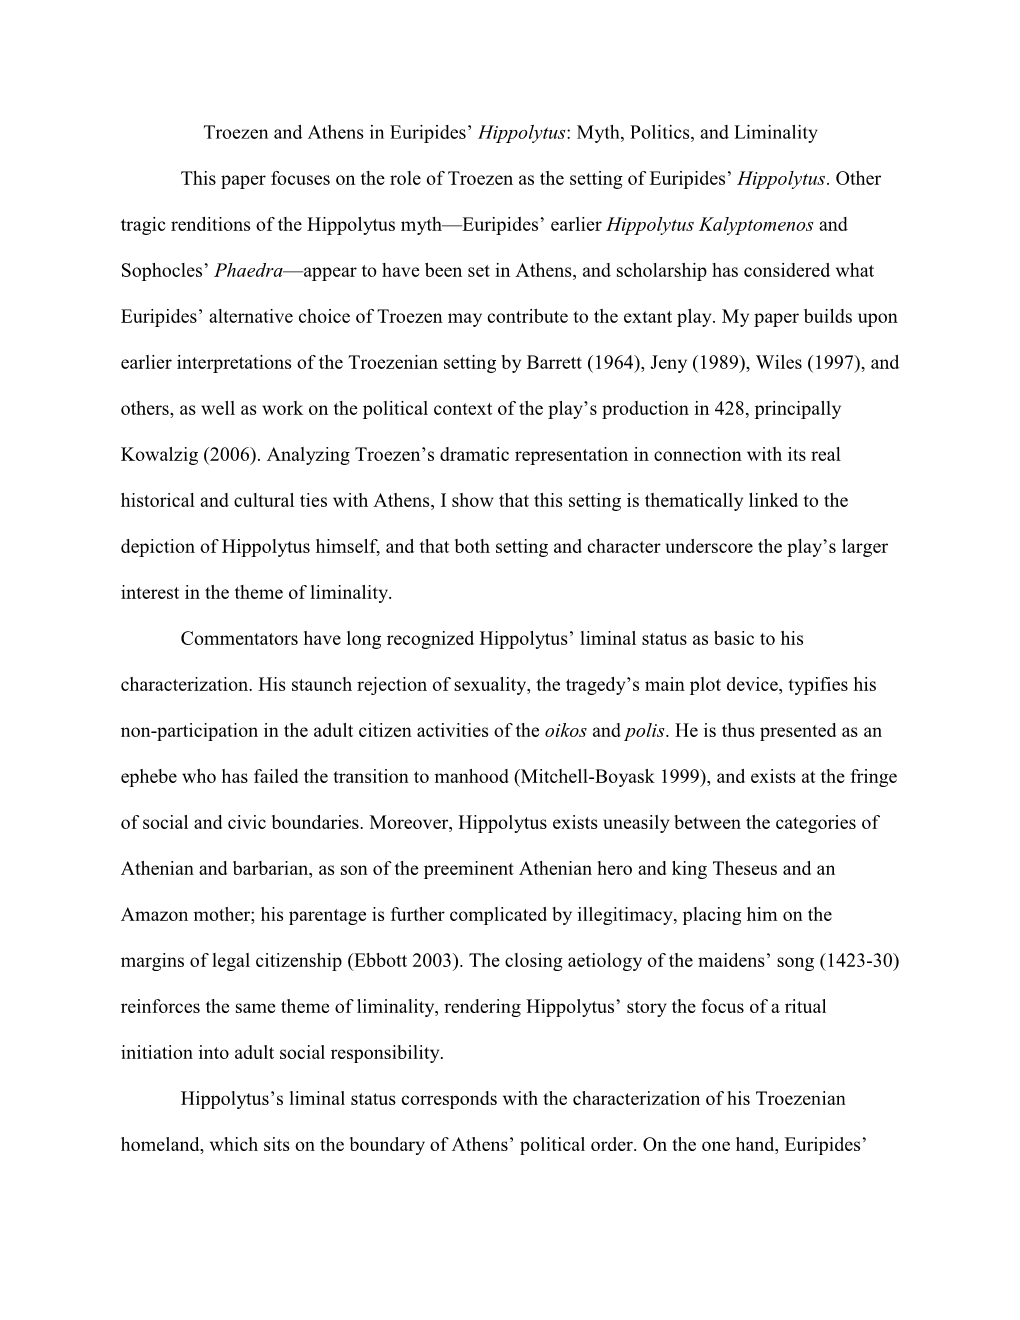 Troezen and Athens in Euripides' Hippolytus: Myth, Politics, and Liminality This Paper Focuses on the Role of Troezen As the S